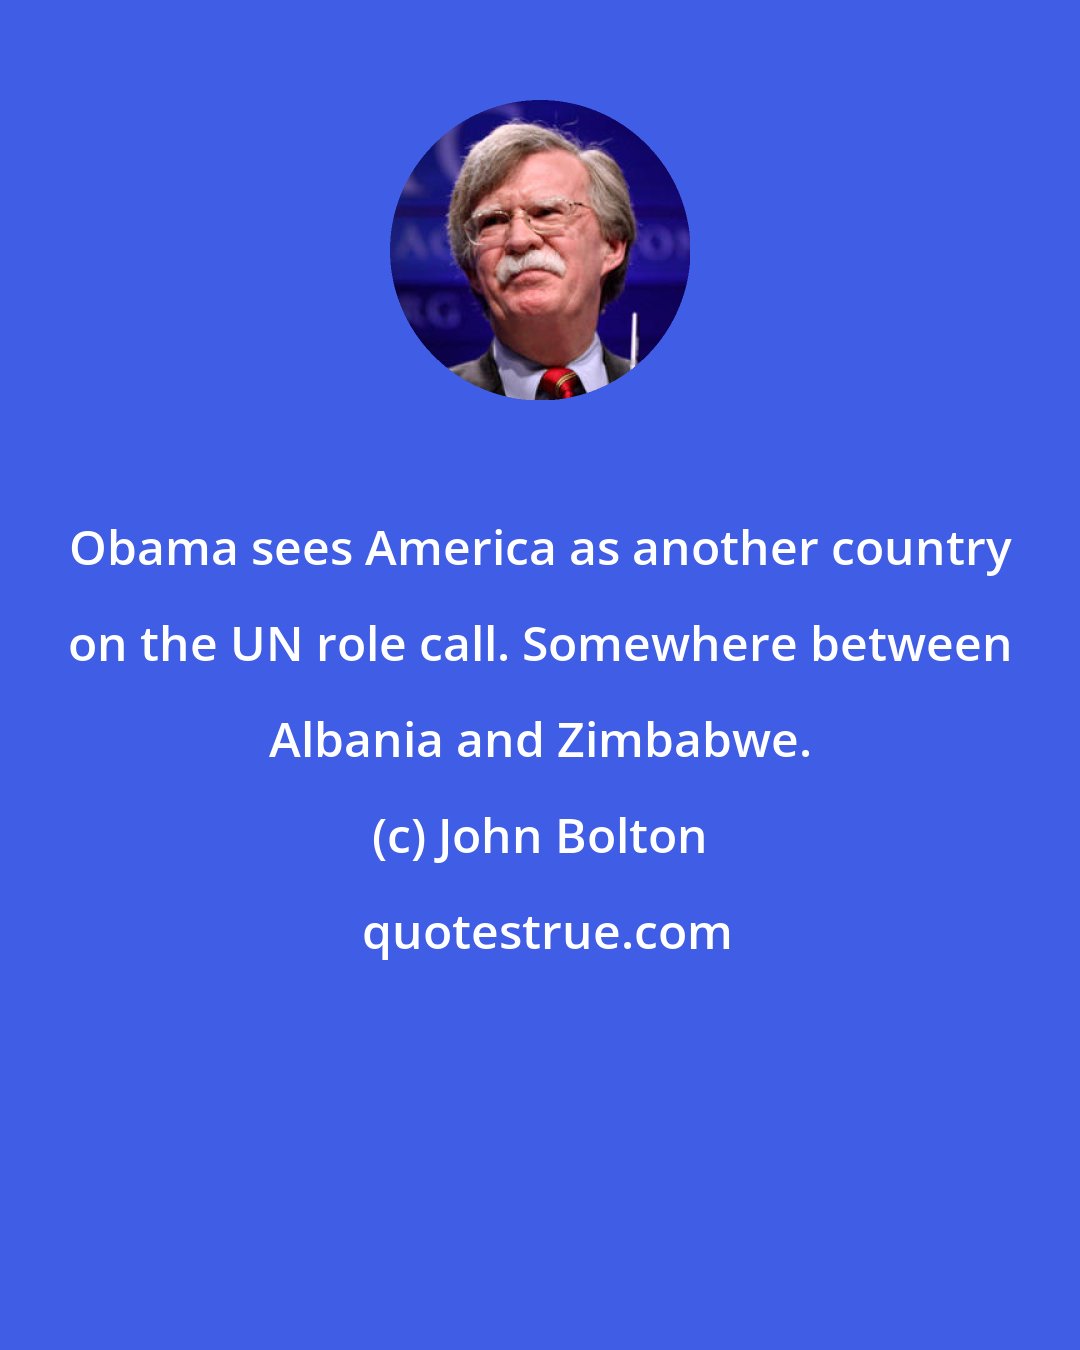 John Bolton: Obama sees America as another country on the UN role call. Somewhere between Albania and Zimbabwe.